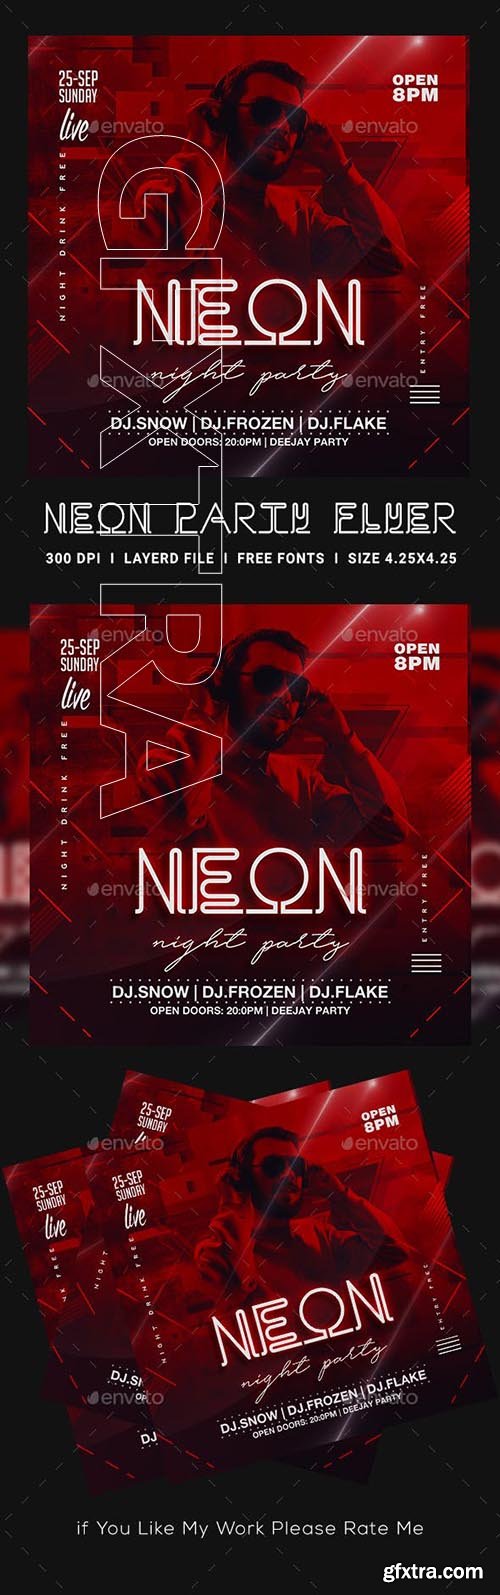 GraphicRiver - Neon Party Flyer 23452974